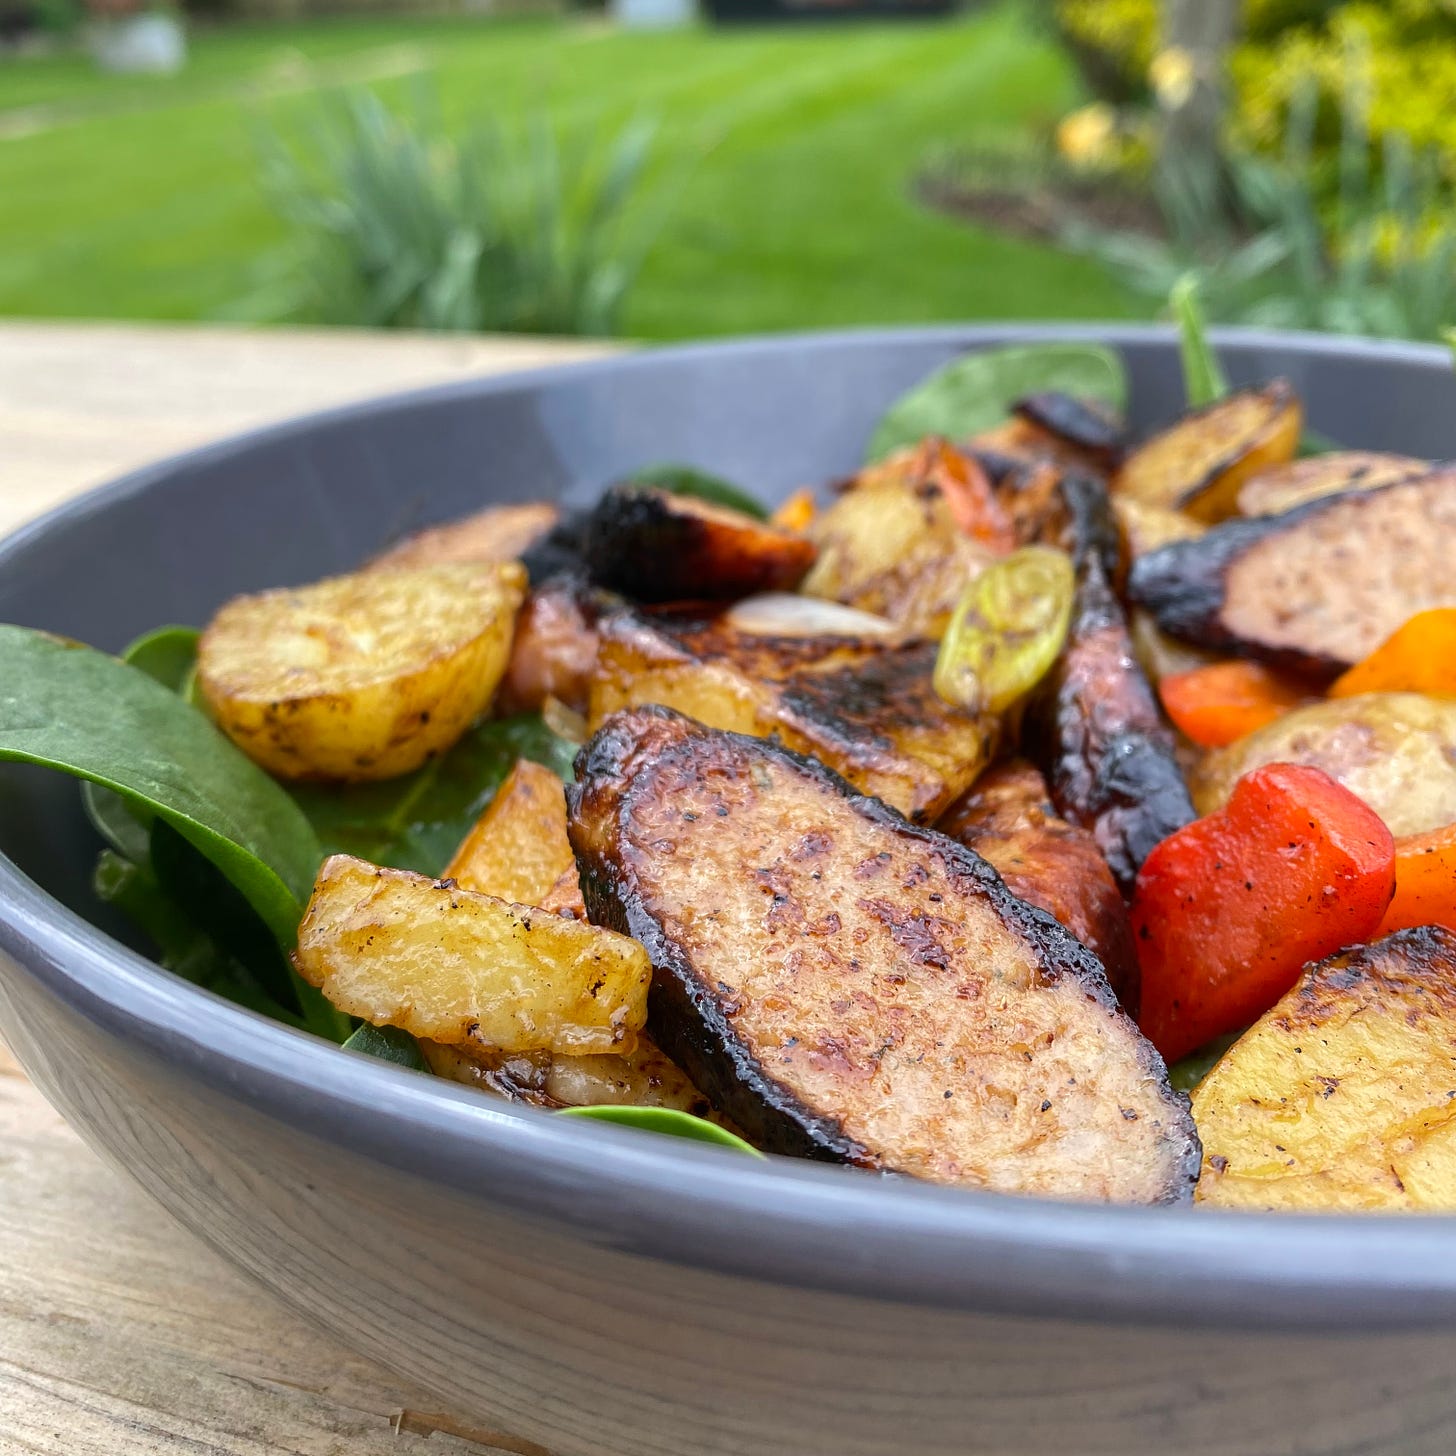 Bowl filled with sliced sausages, peppers, potatoes and salad leaves on a table outside with garden in the backgroud